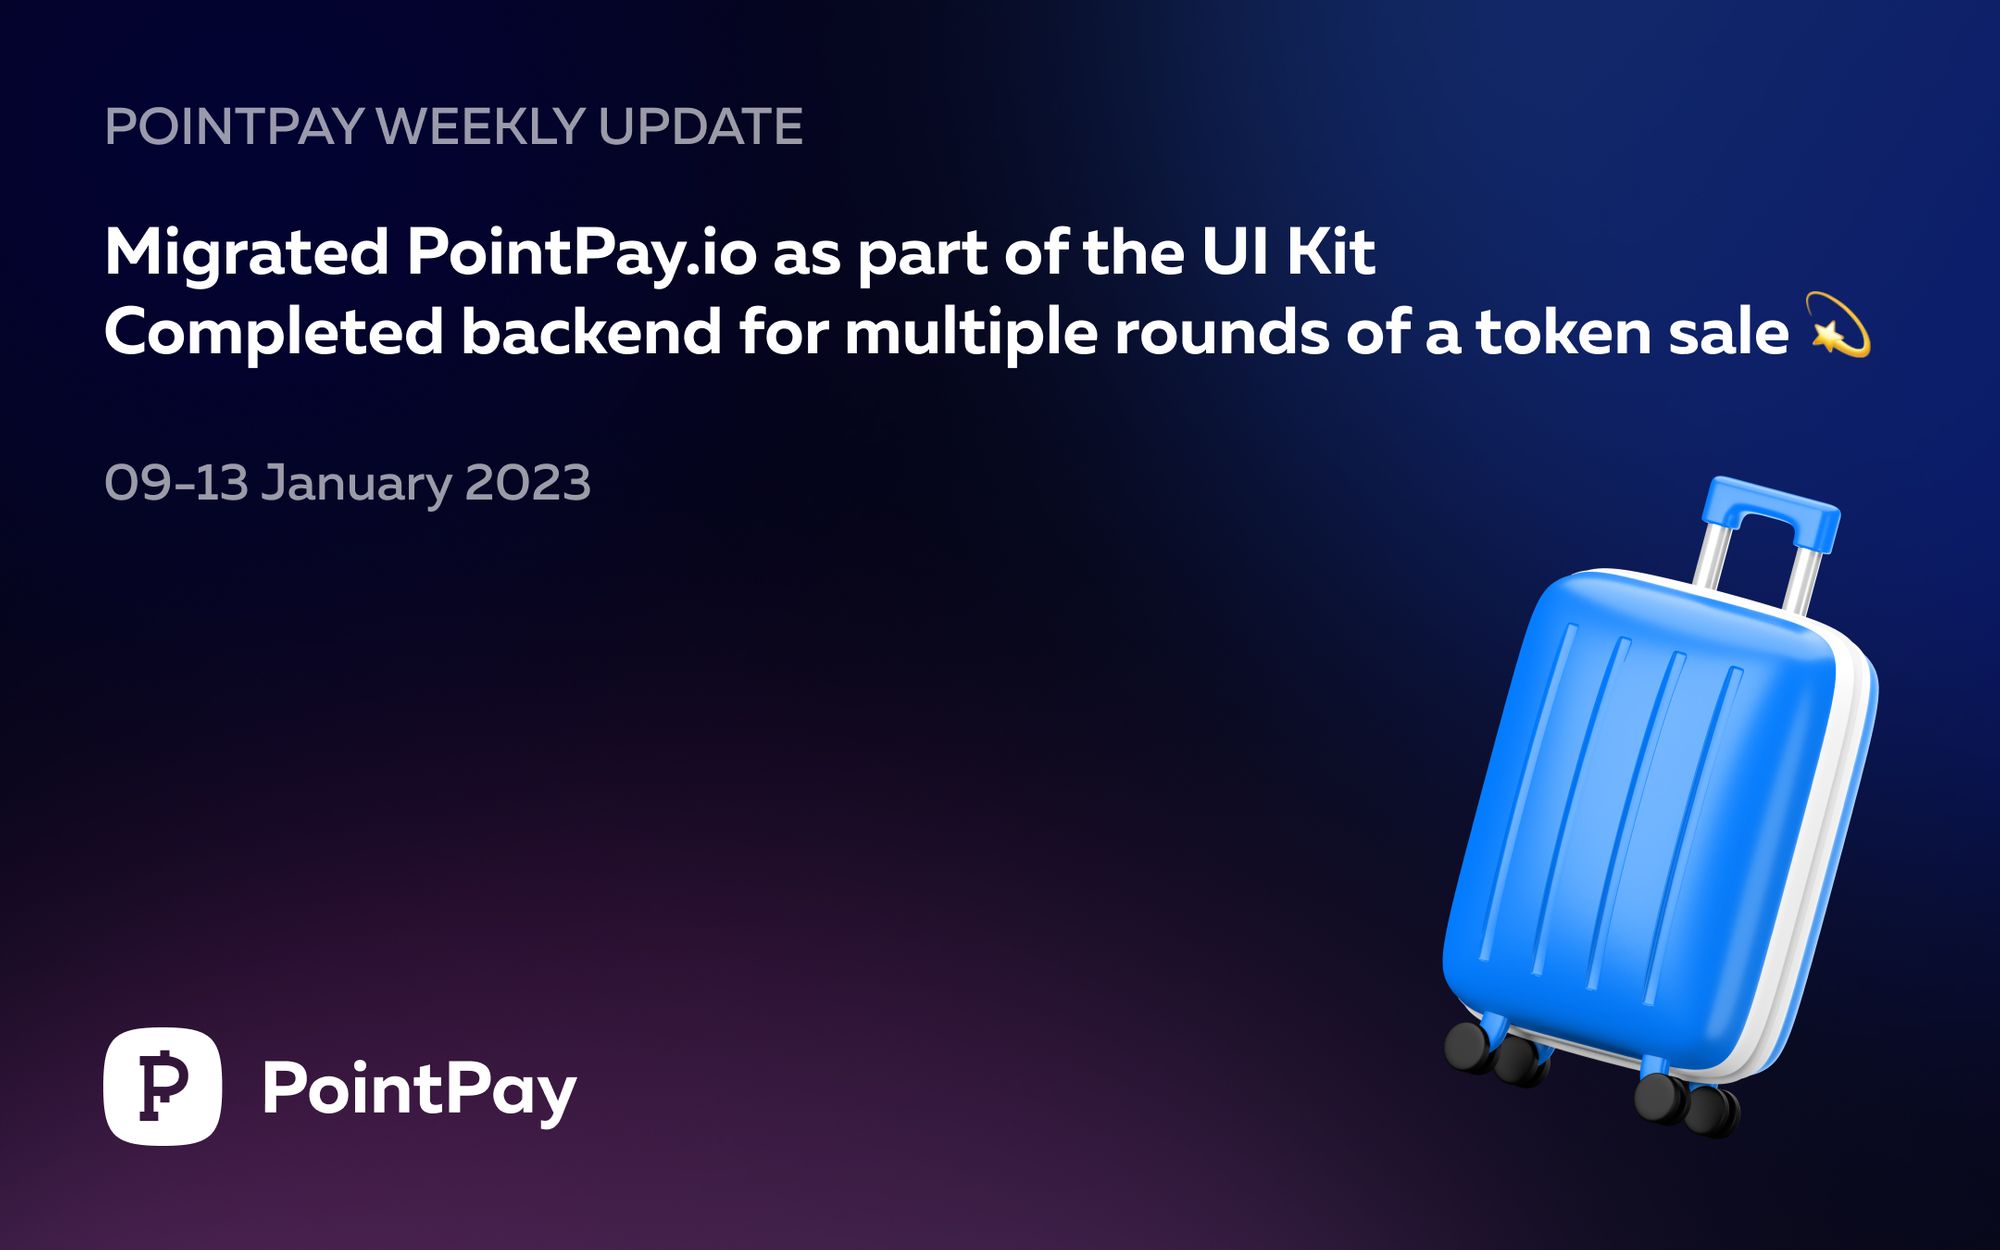 PointPay Weekly Update (9 - 13 January 2023)